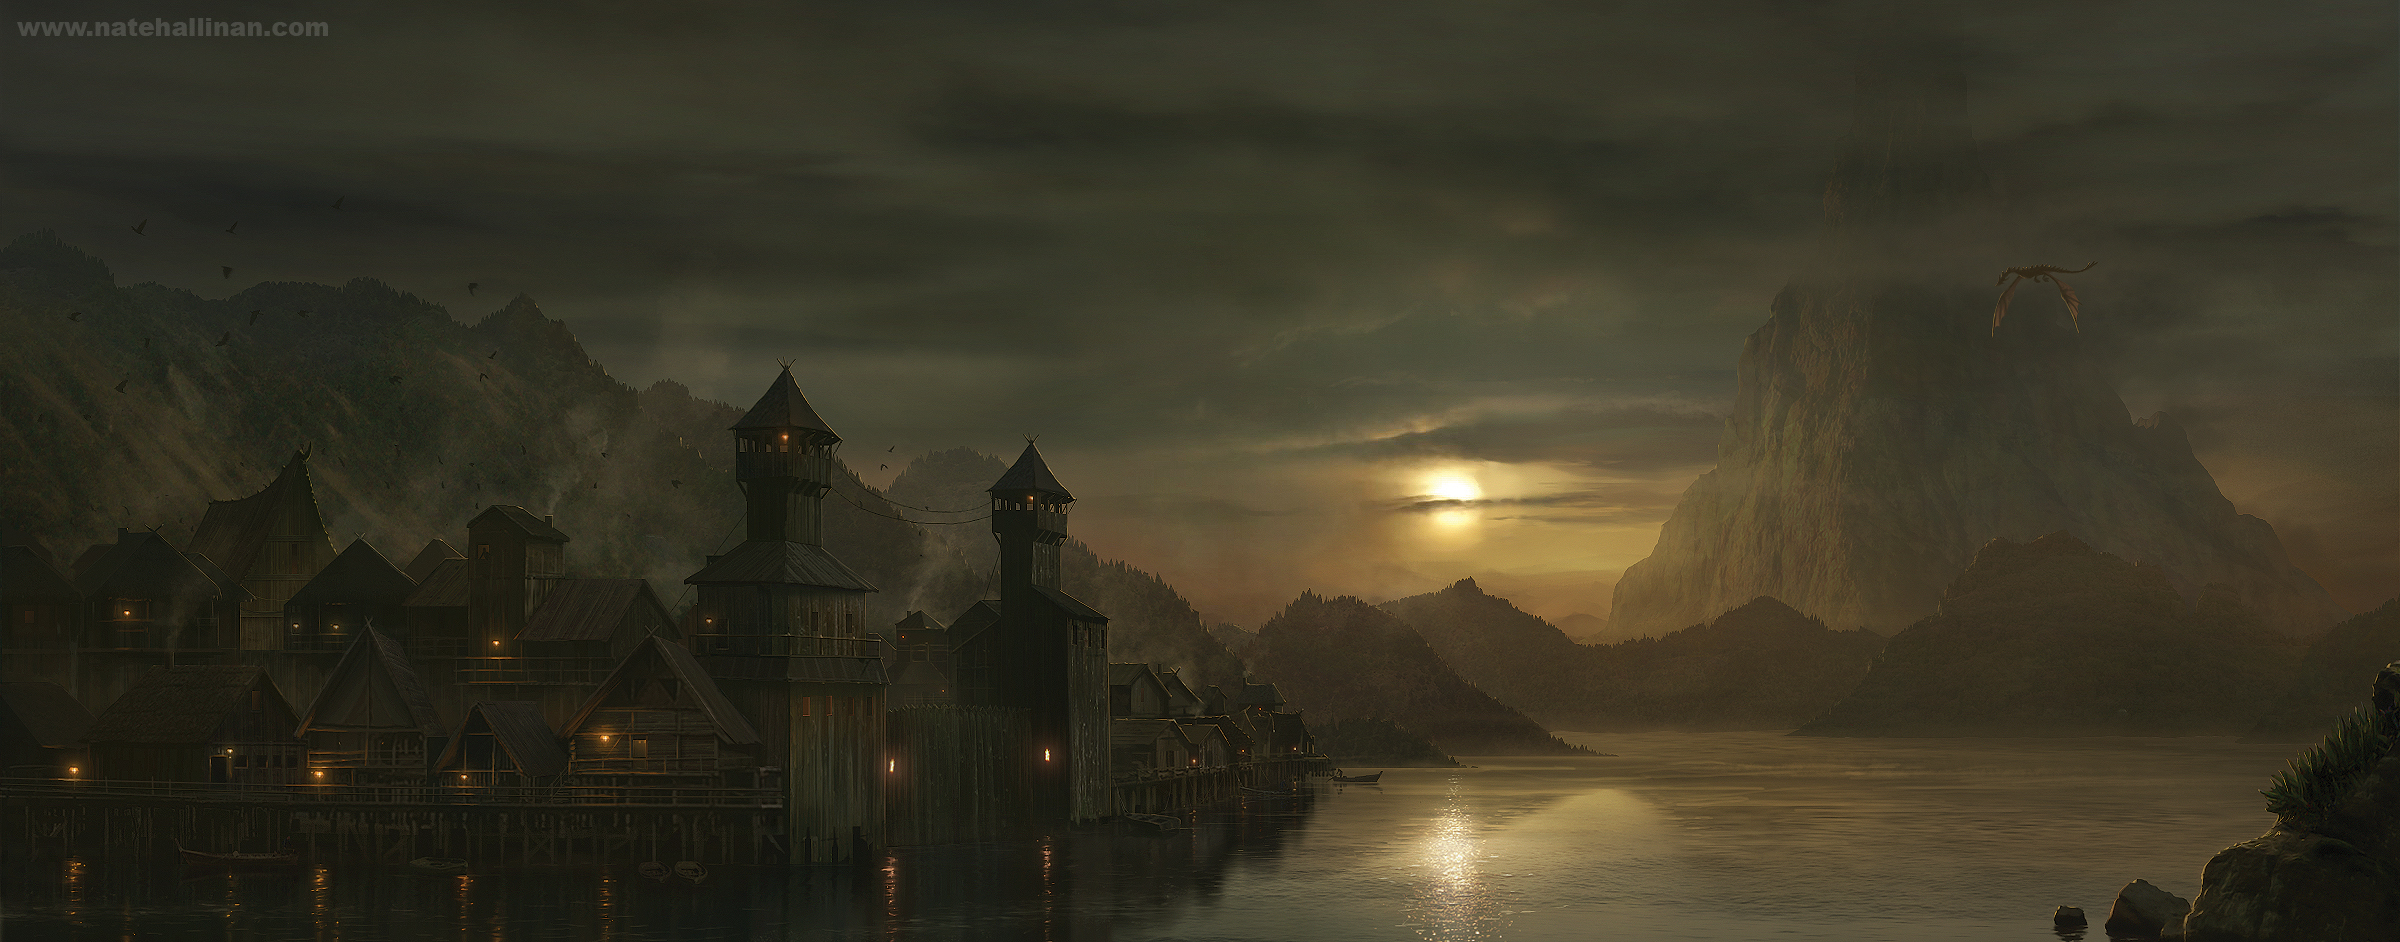 lake_town___the_hobbit_by_n8package-d2oswwp.jpg